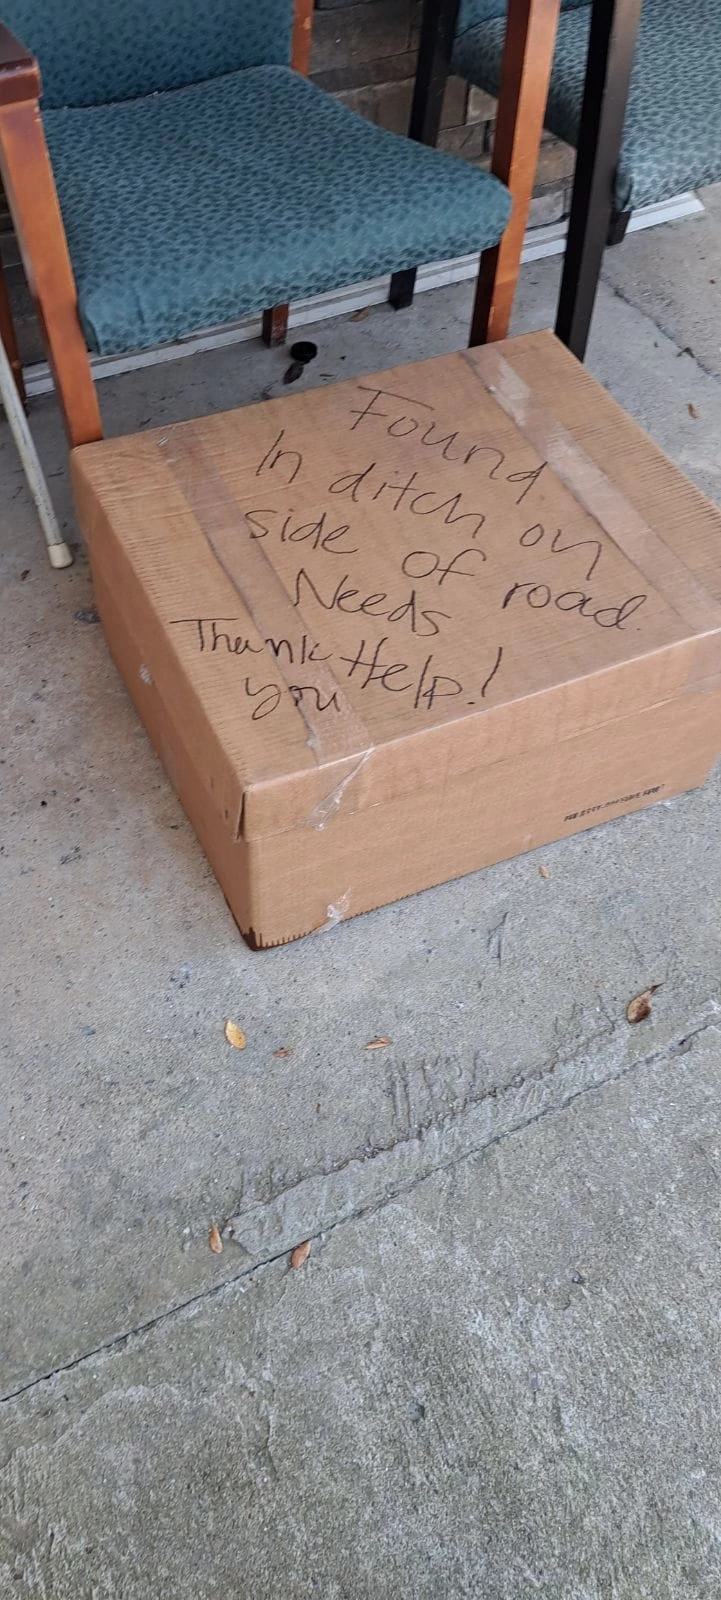 Mysterious box outside the shelter.